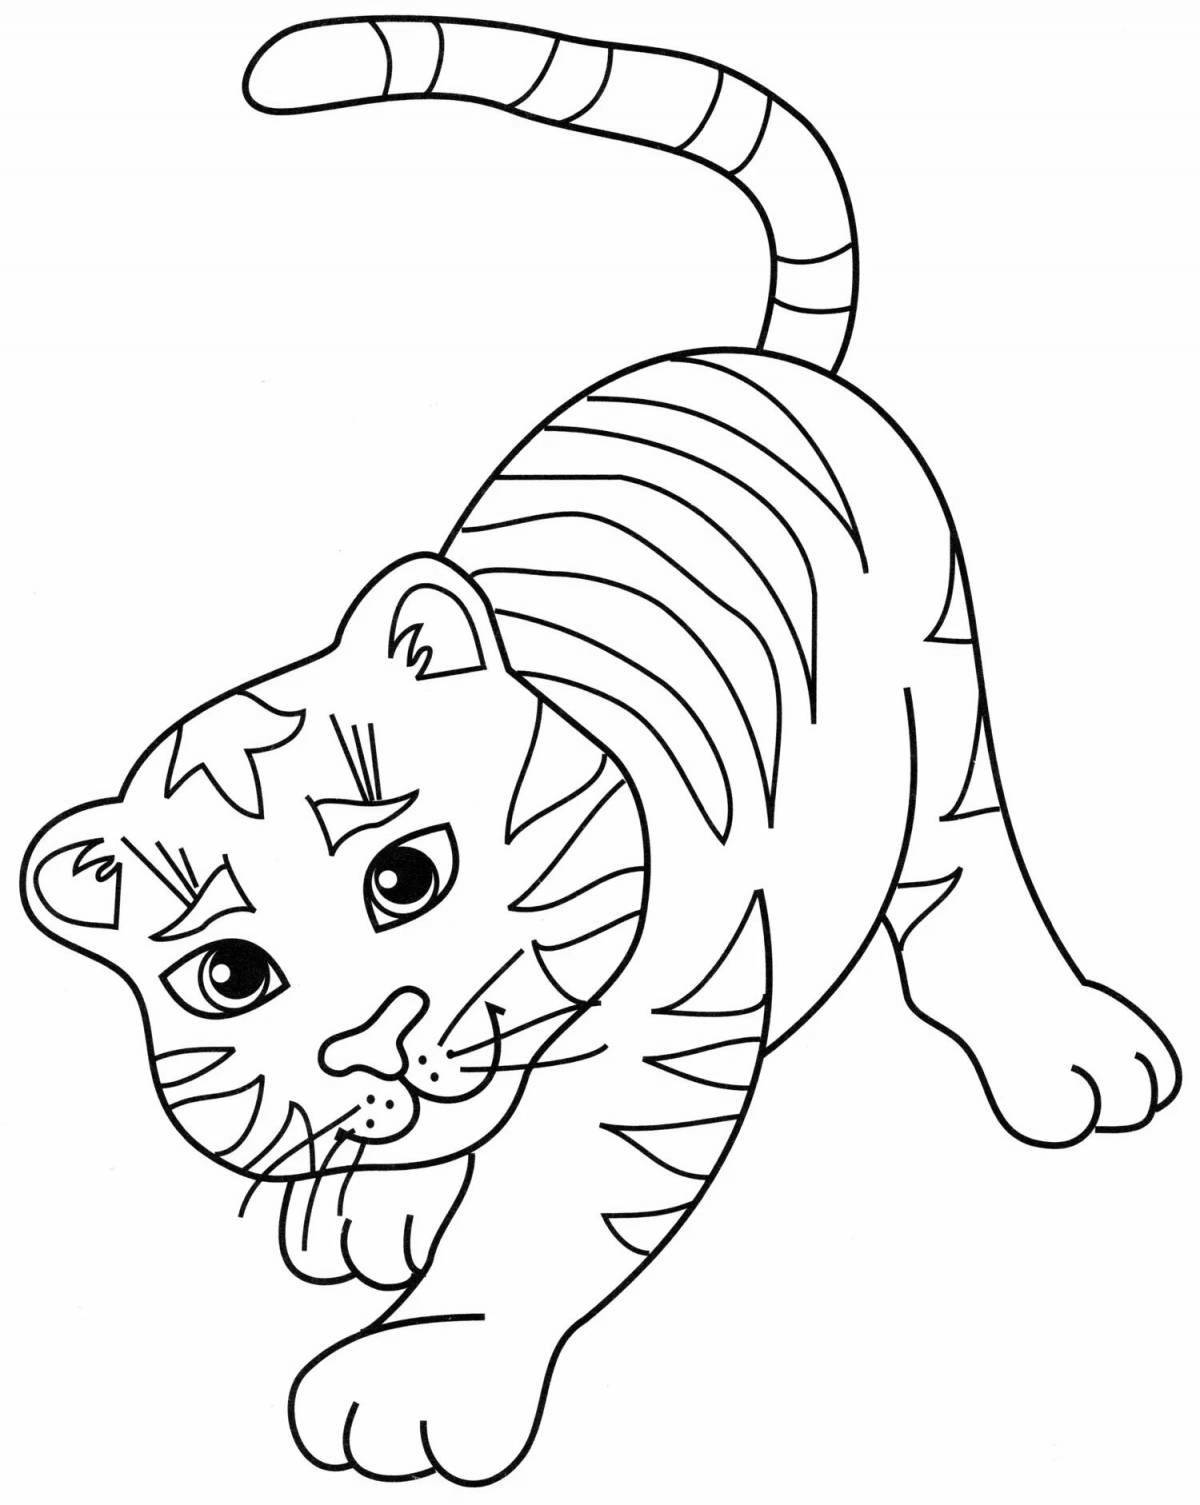 Colorful tiger coloring pages for kids